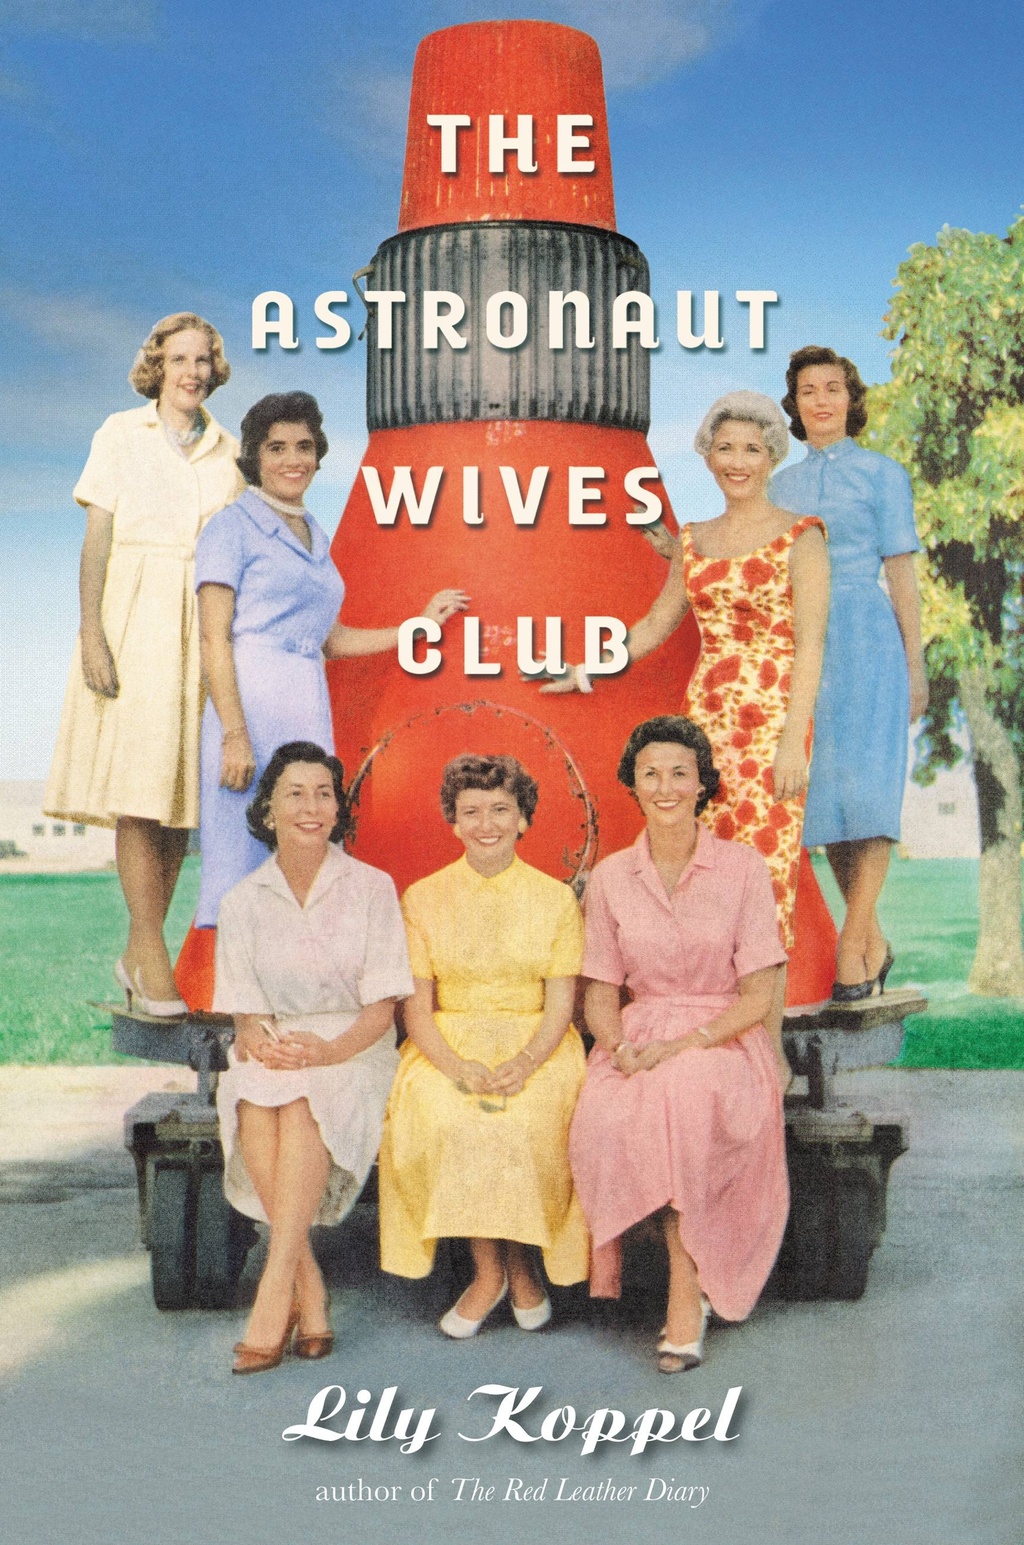 astronaut-wives-club